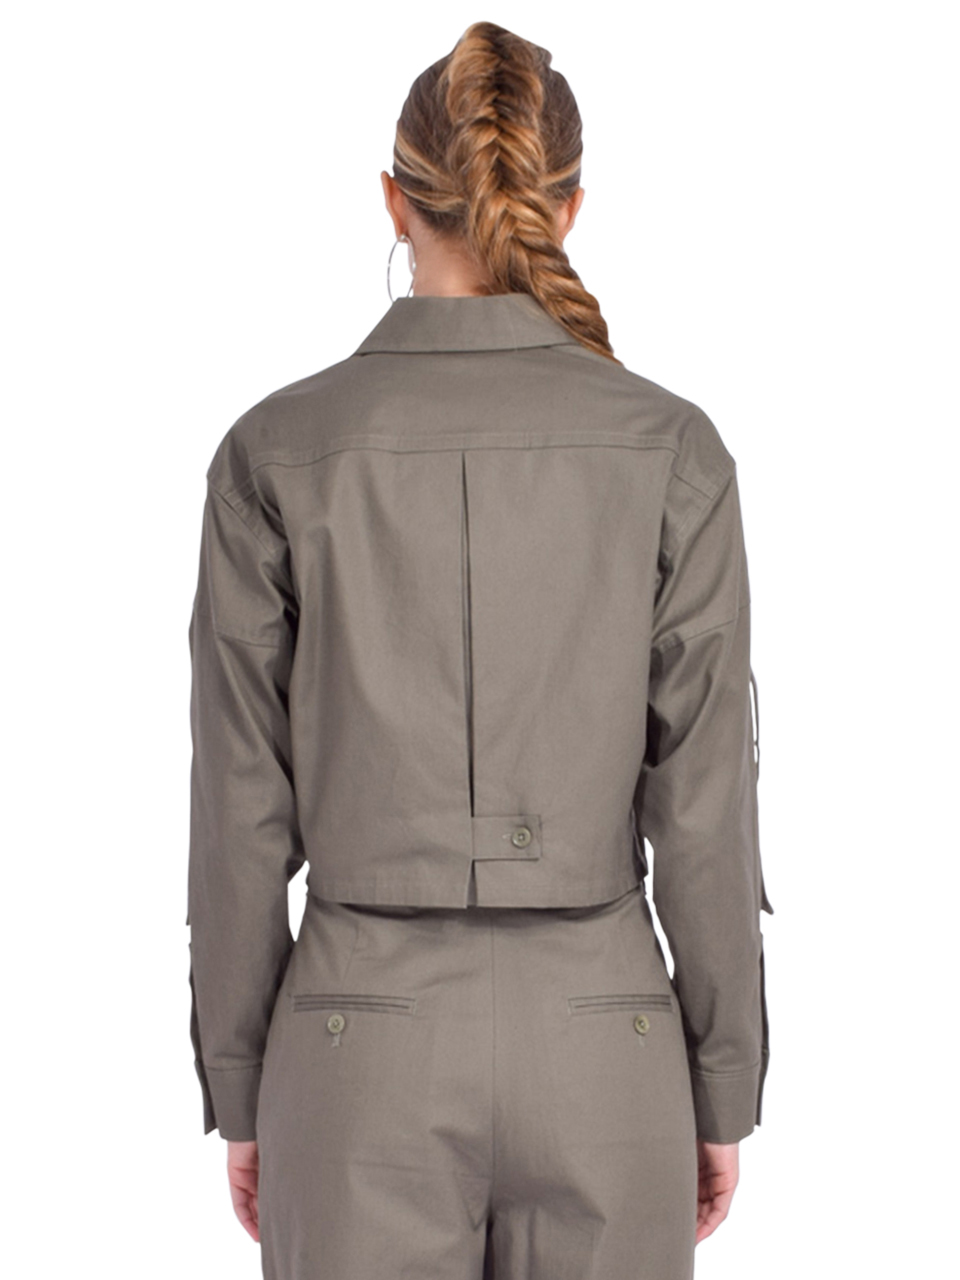 3.1 Phillip Lim Cropped Convertible Shirt Jacket in Army Back View 